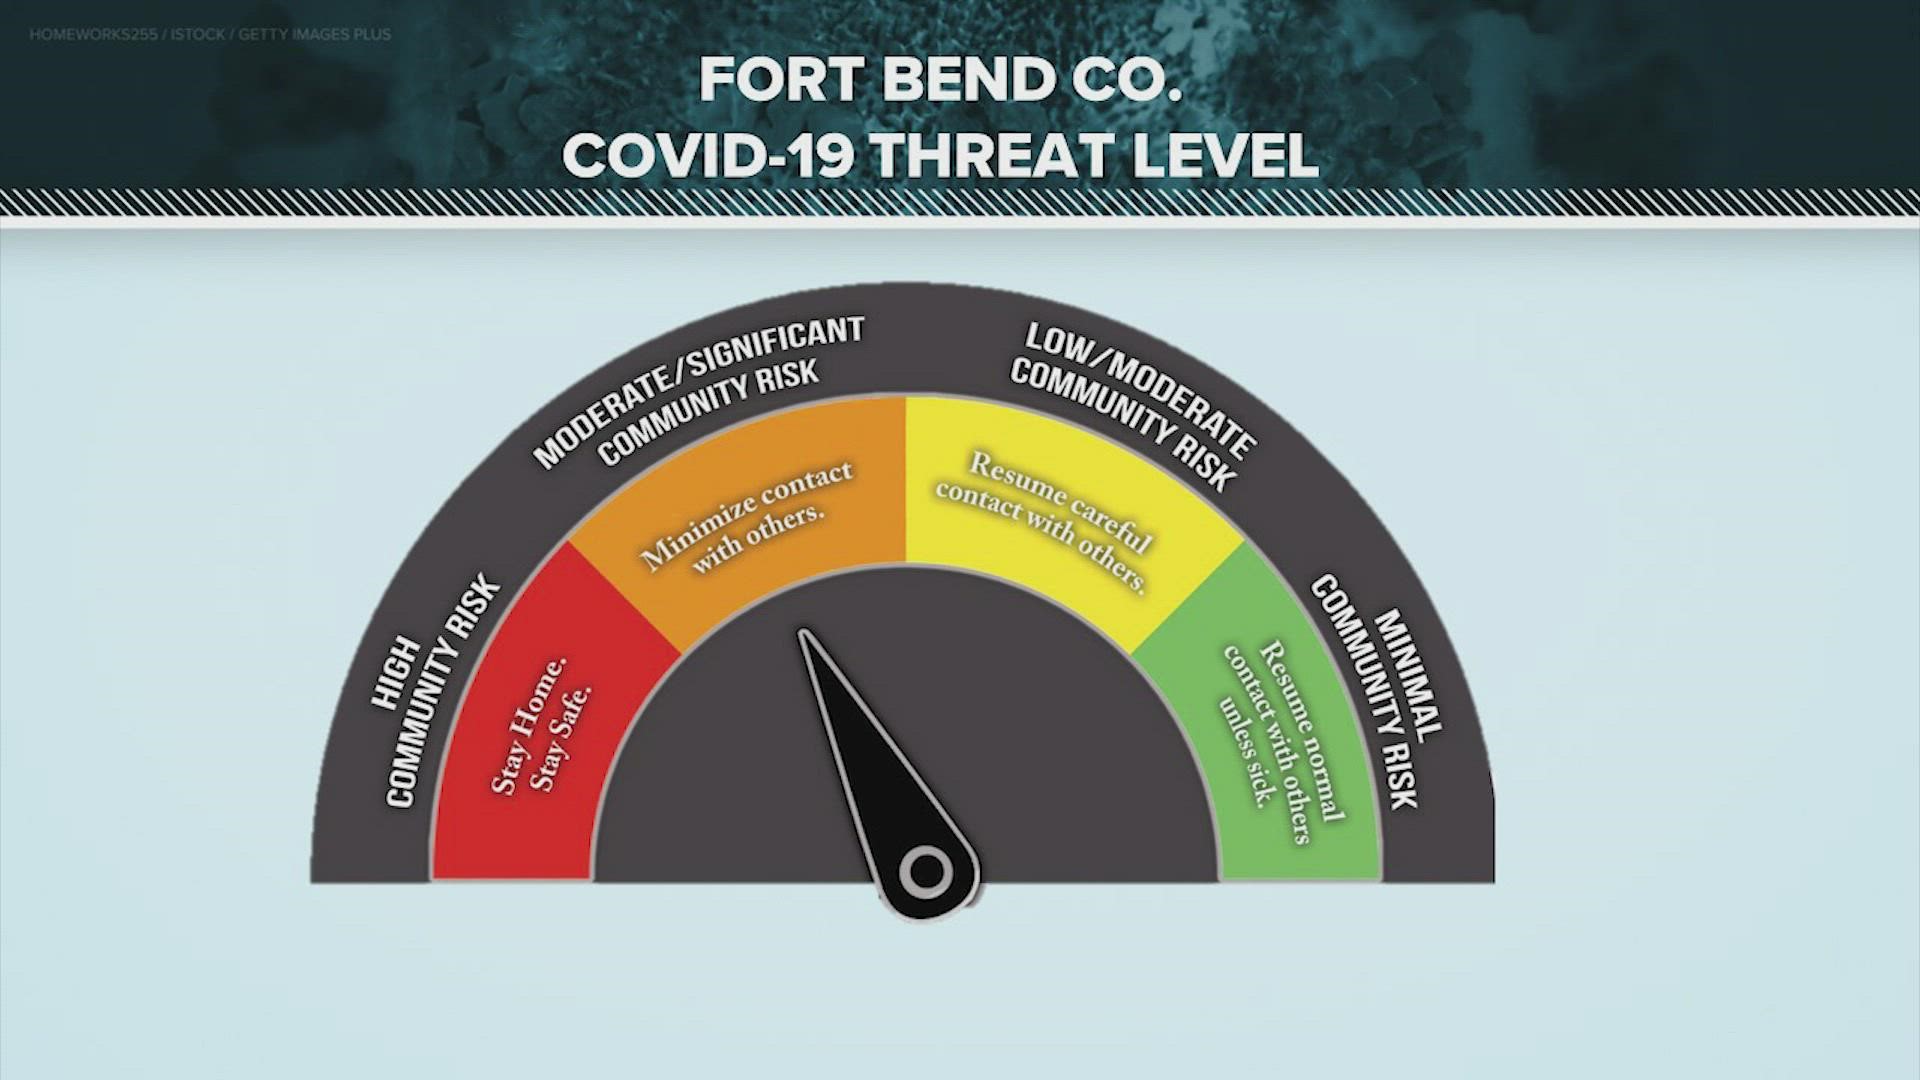 Fort Bend County is raising its COVID-19 threat level back to "orange" in response to the increasing number of confirmed cases and hospitalizations, the county said.